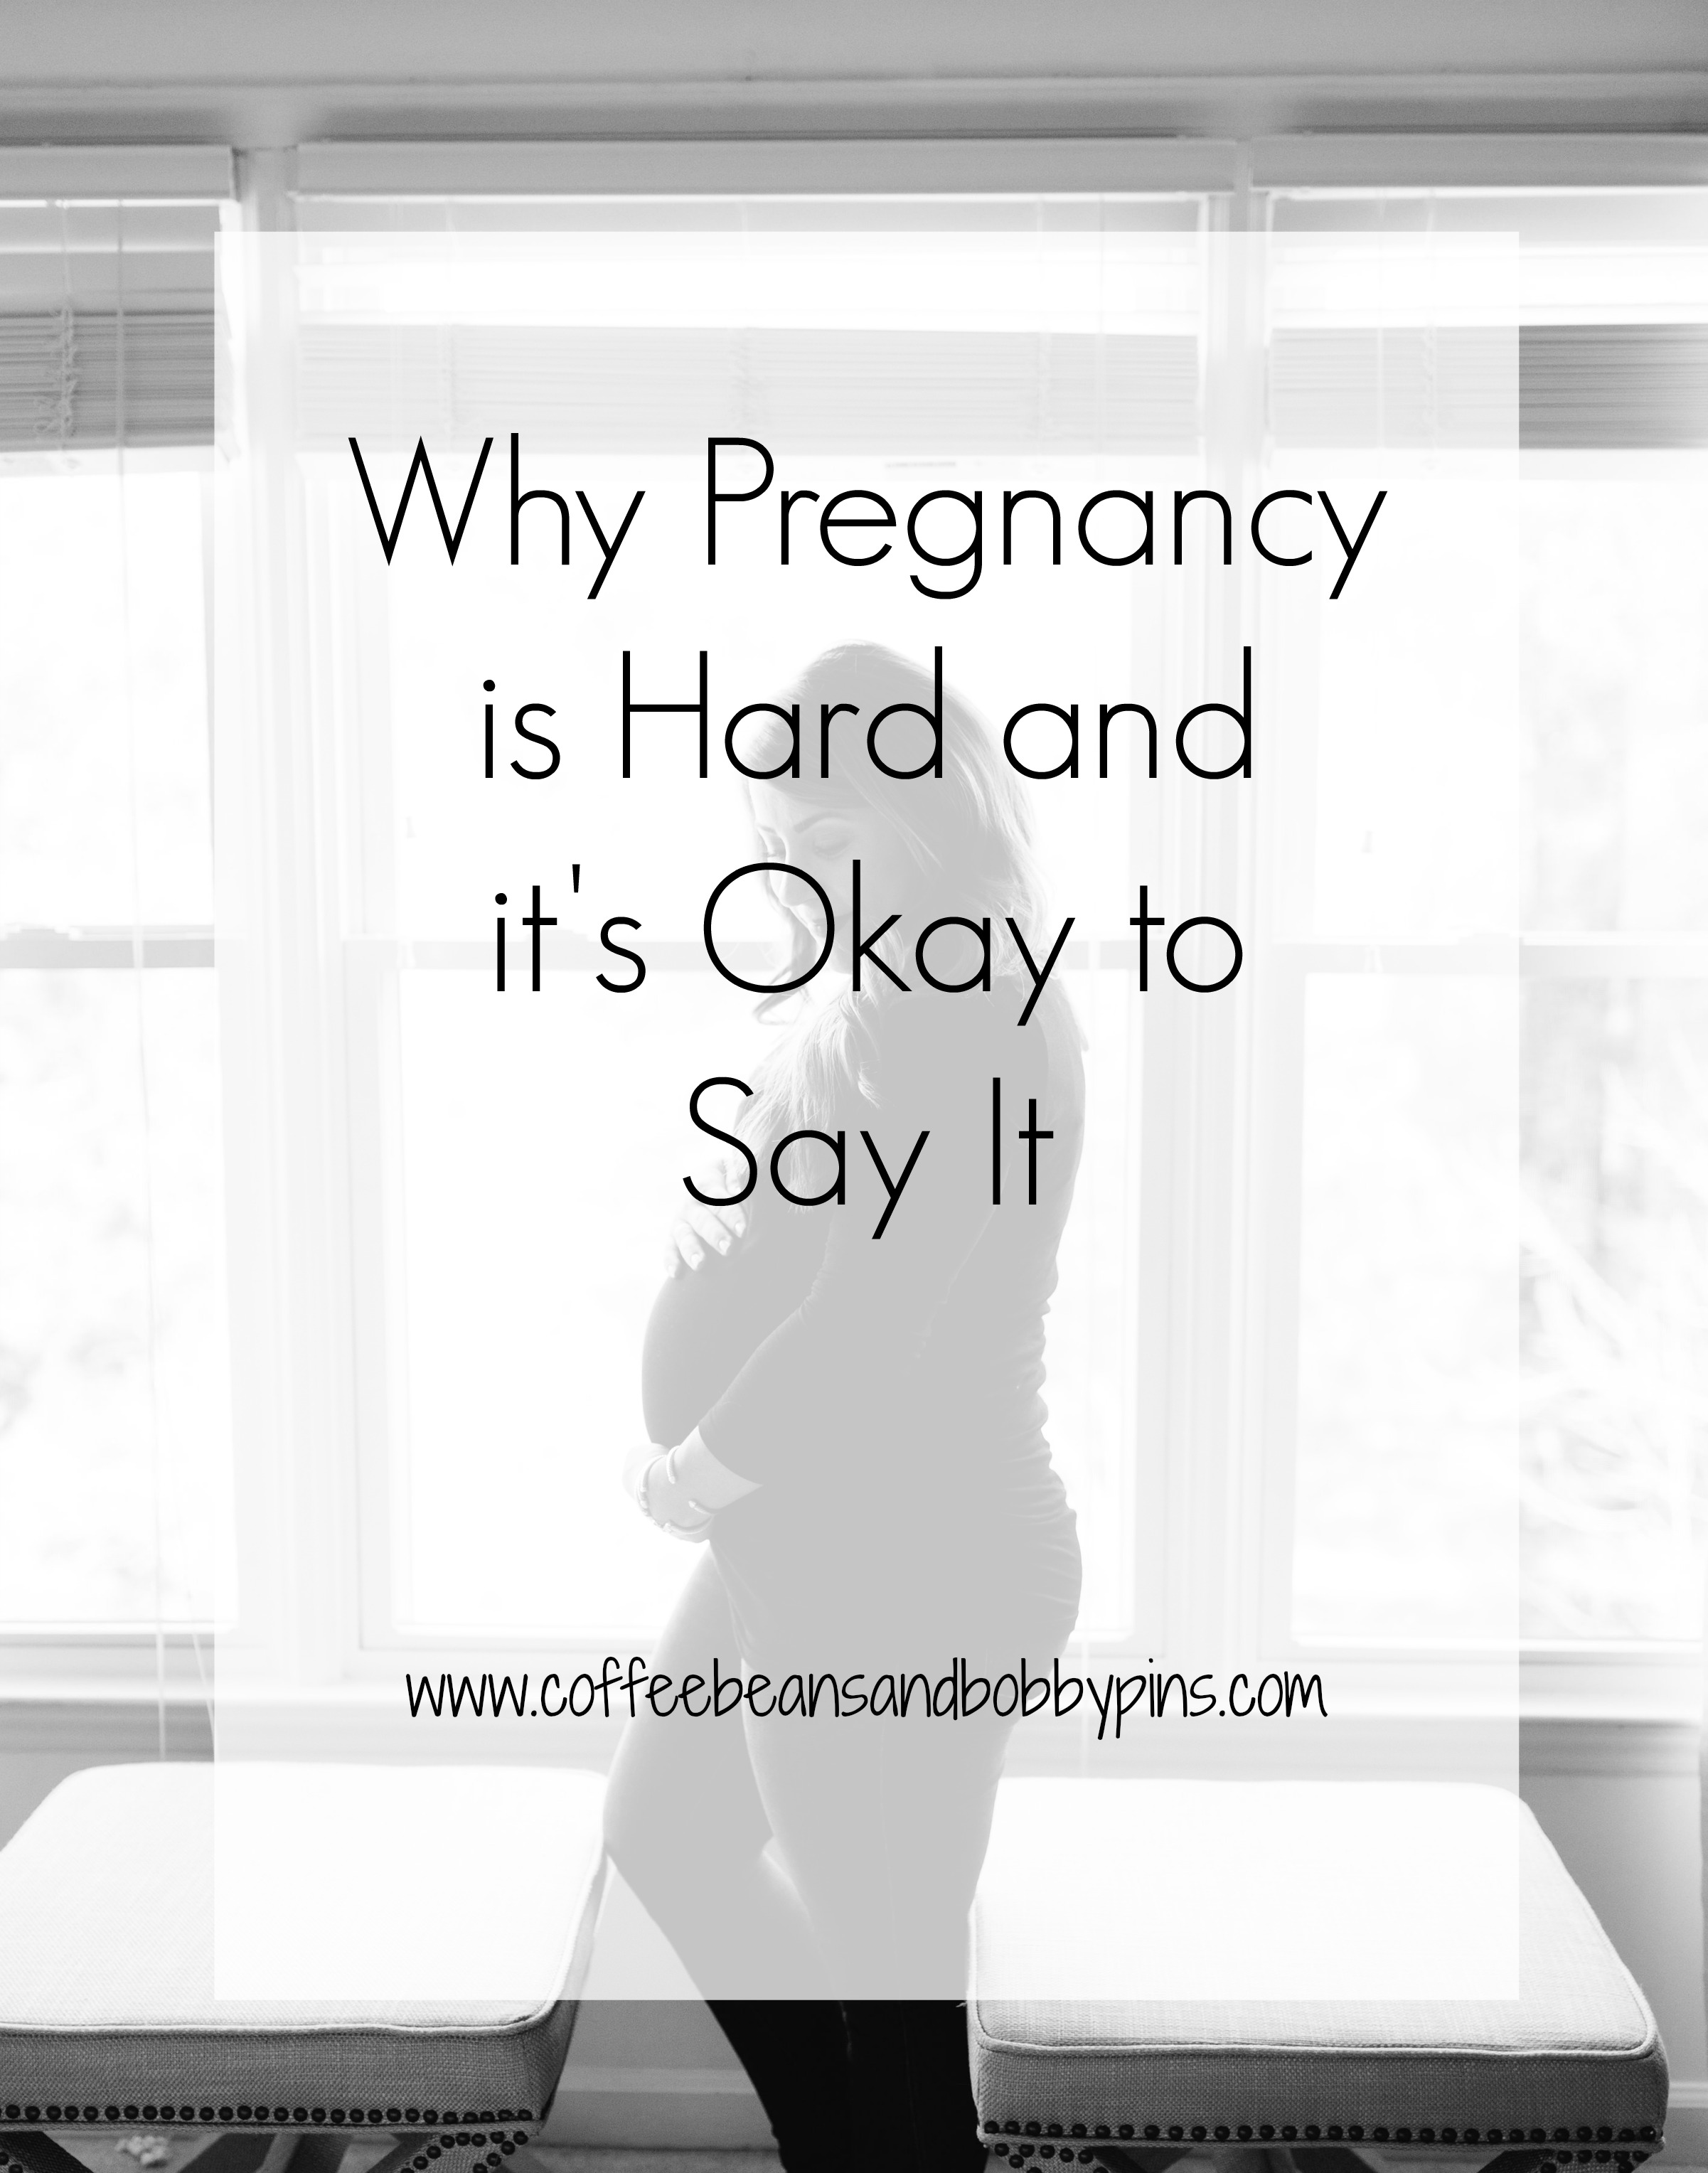 Pregnancy Talk: Why Pregnancy is Hard and it's Okay to Say It by popular North Carolina blogger Coffee Beans and Bobby Pins